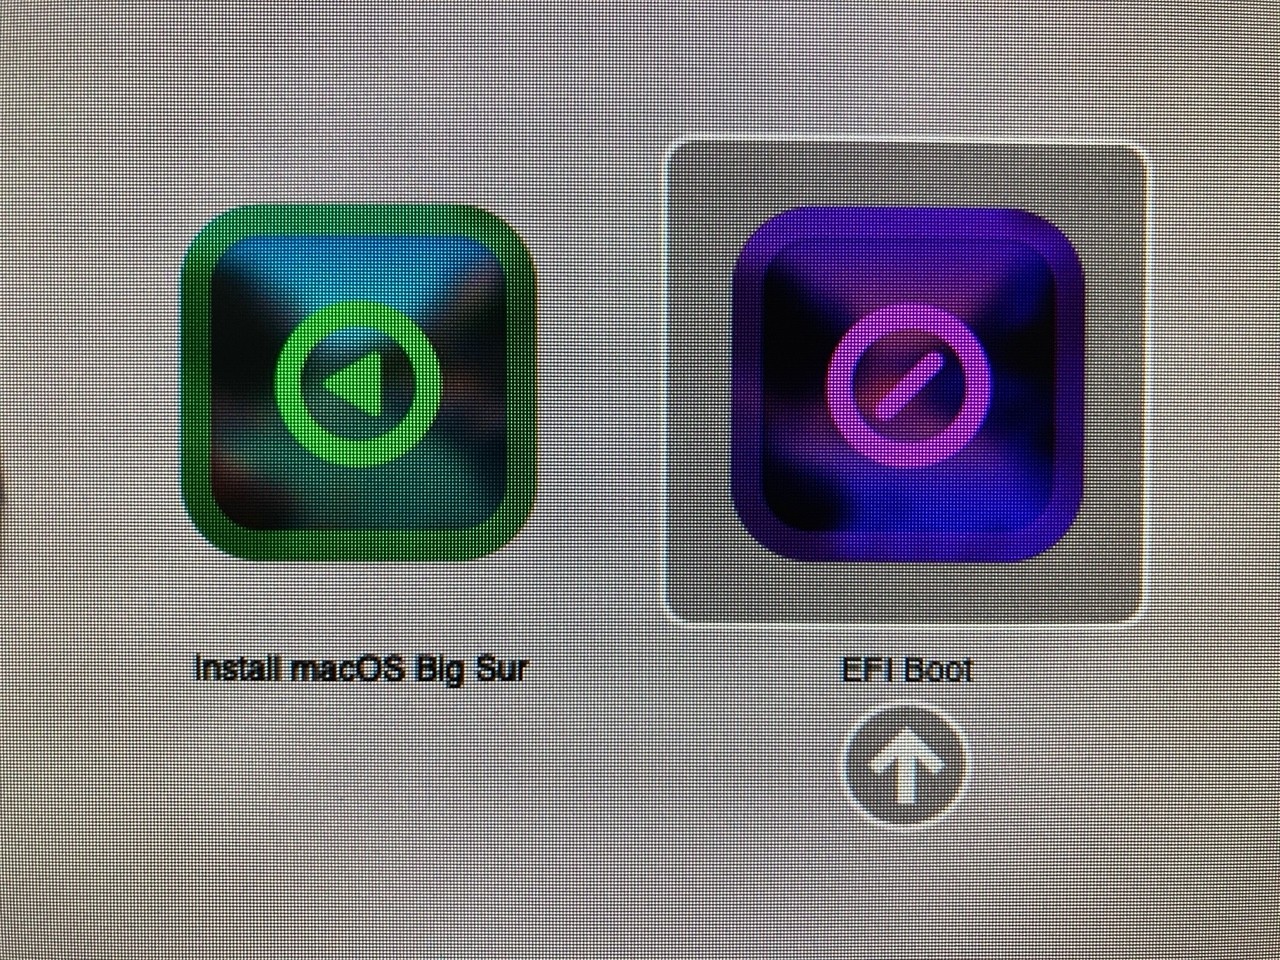 big sur patch for unsupported macs